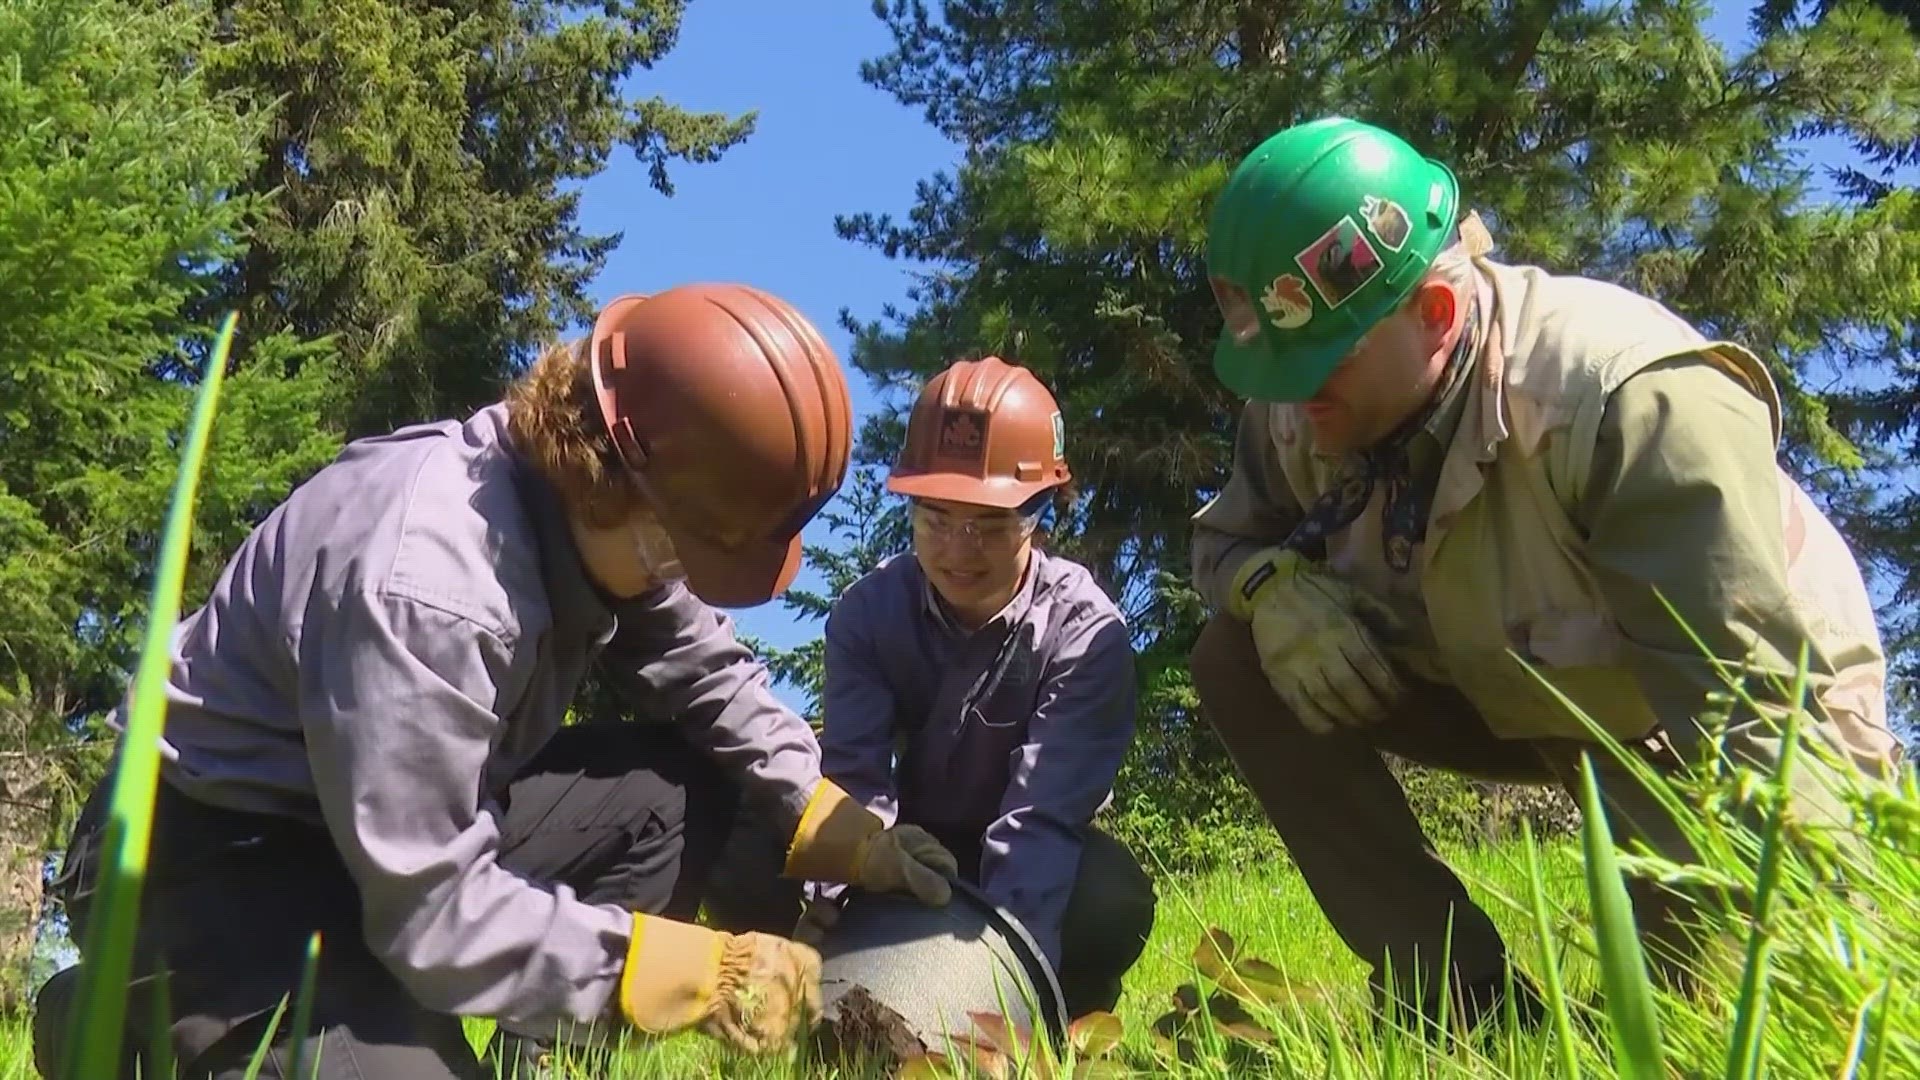 The U.S. Forest Service awarded a $4 million grant to the Northwest Youth Corps to support urban forestry efforts in the Tacoma area.